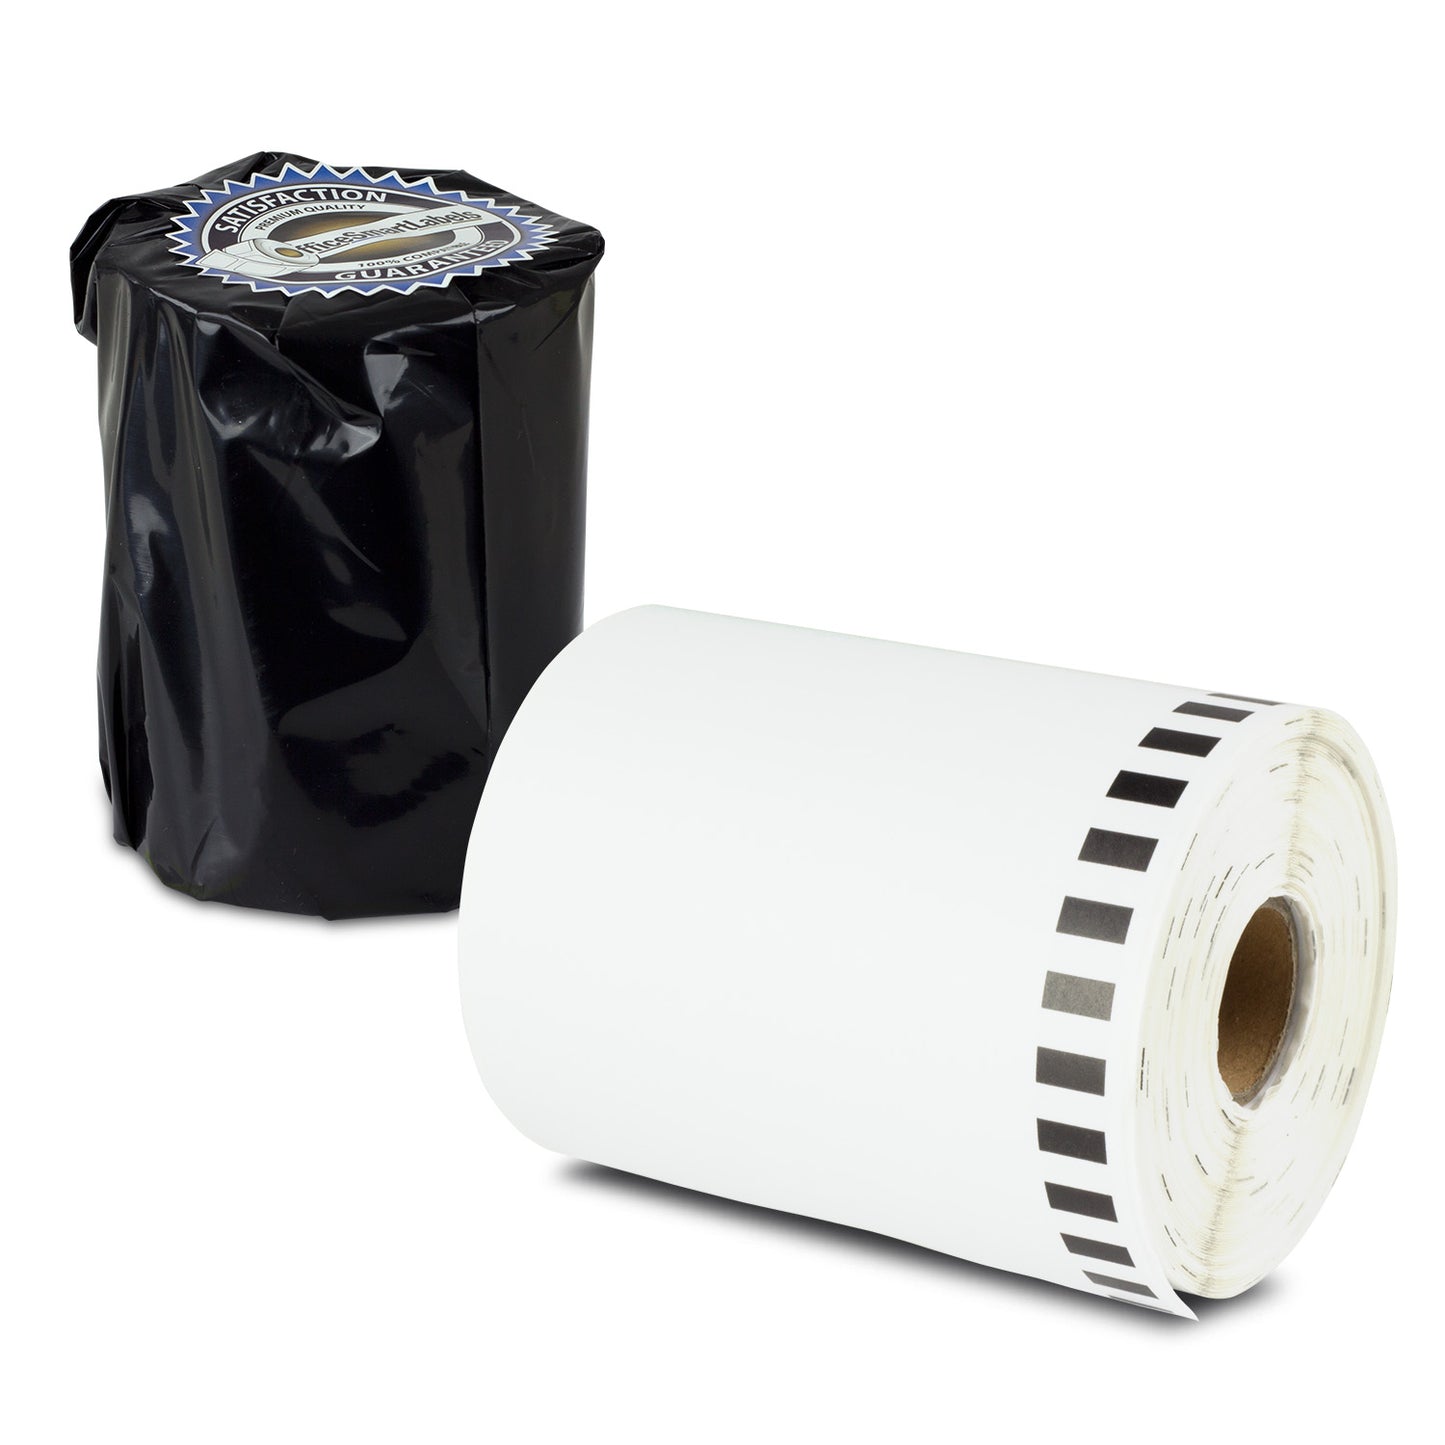 4 inch x 100 ft. | Brother DK-2243 Compatible - 1 Roll without Cartridge